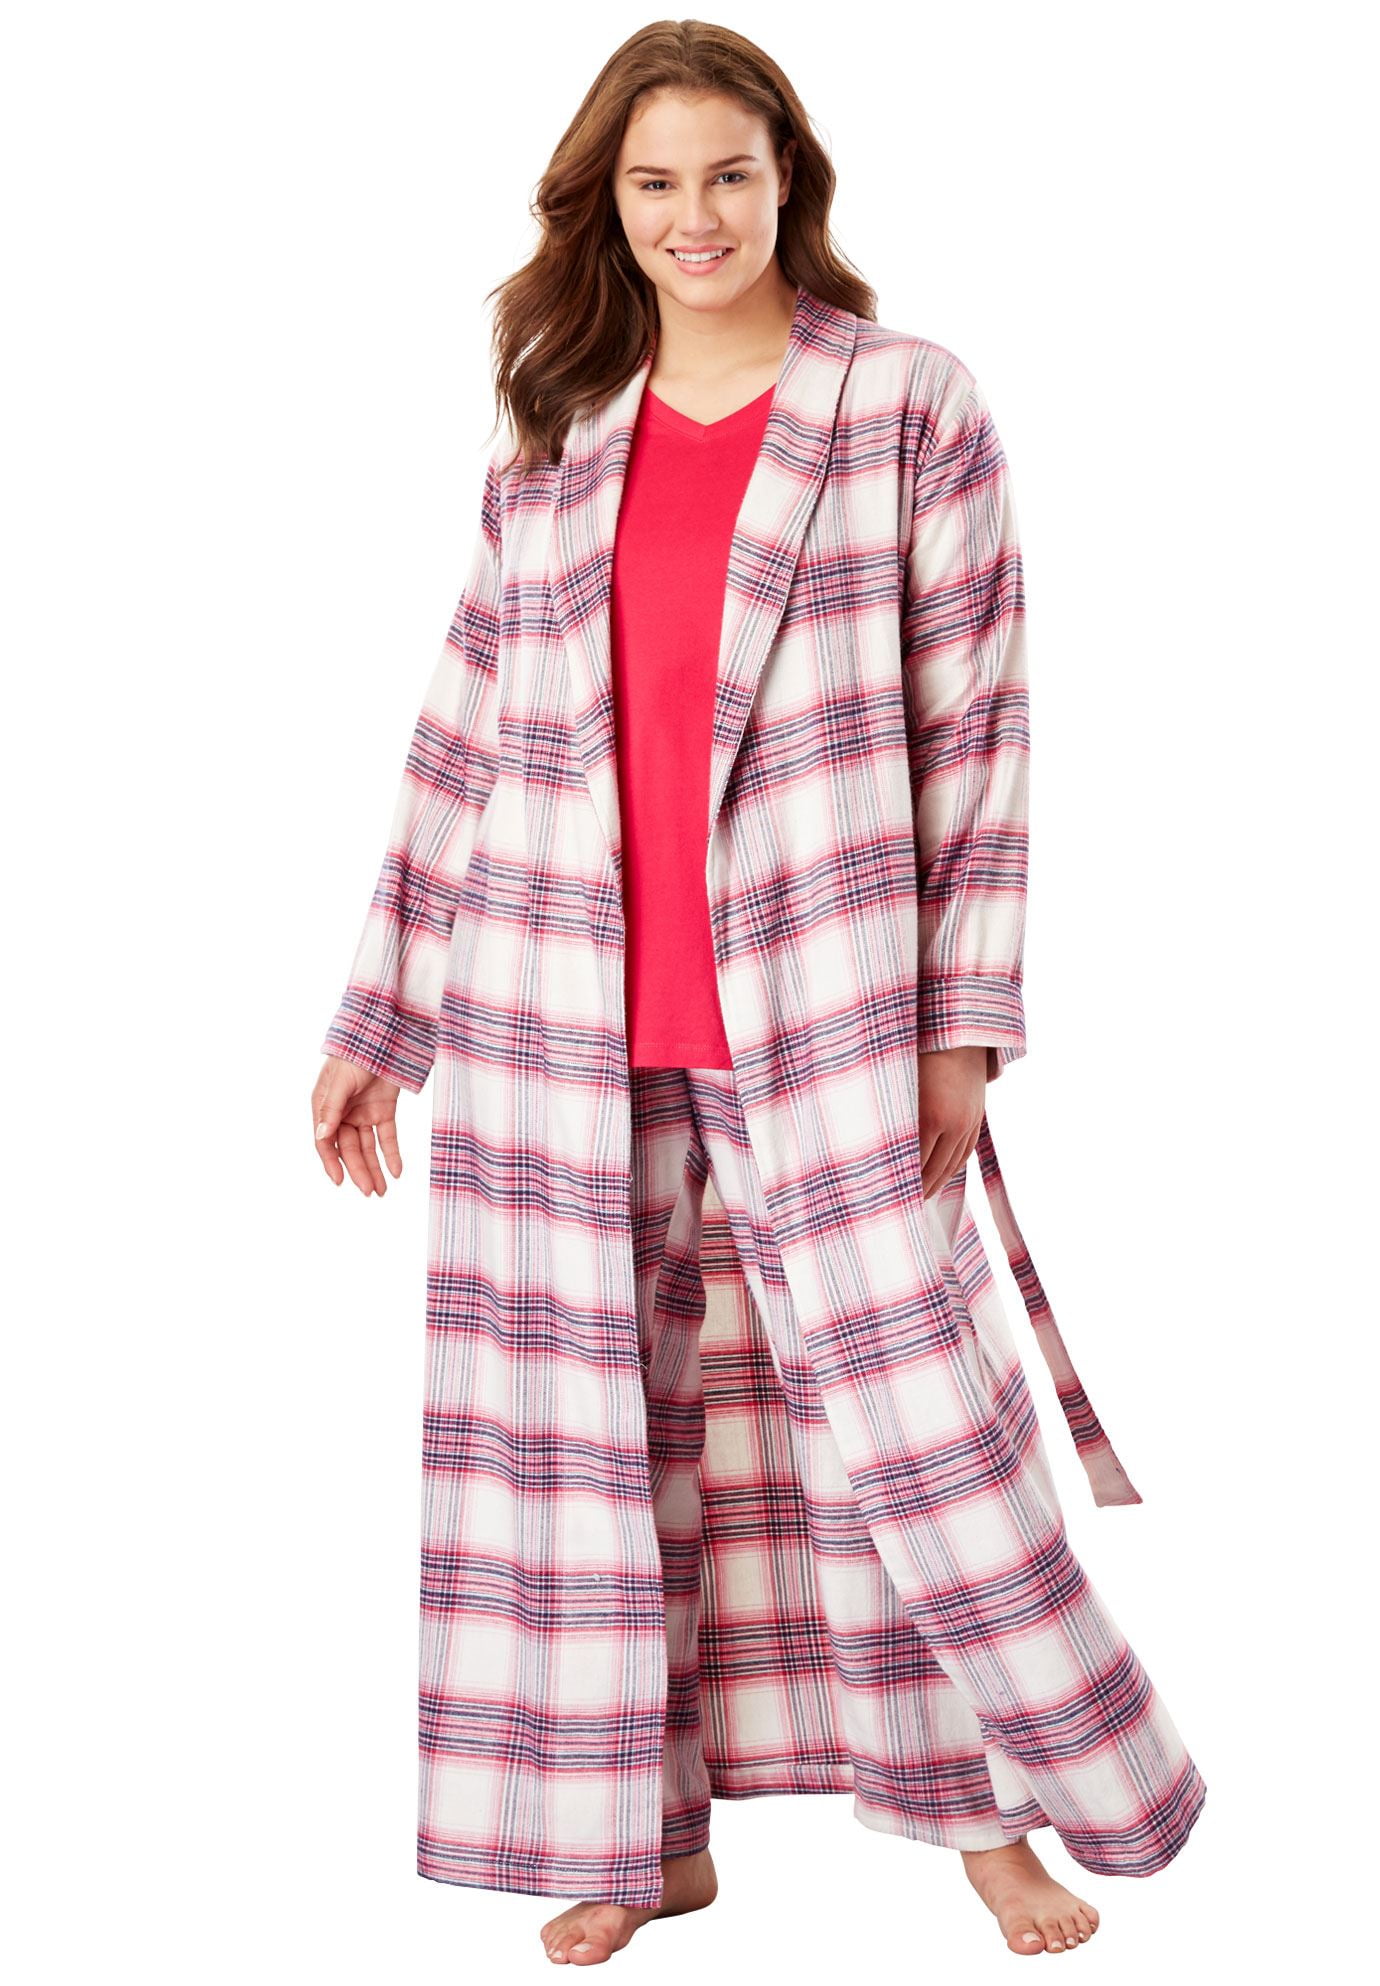 Details about   LADIES WOMENS BLUE BRUSHED CHECK ROBE DRESSING GOWN 'ELIZA' CYBERJAMMIES 8-22 